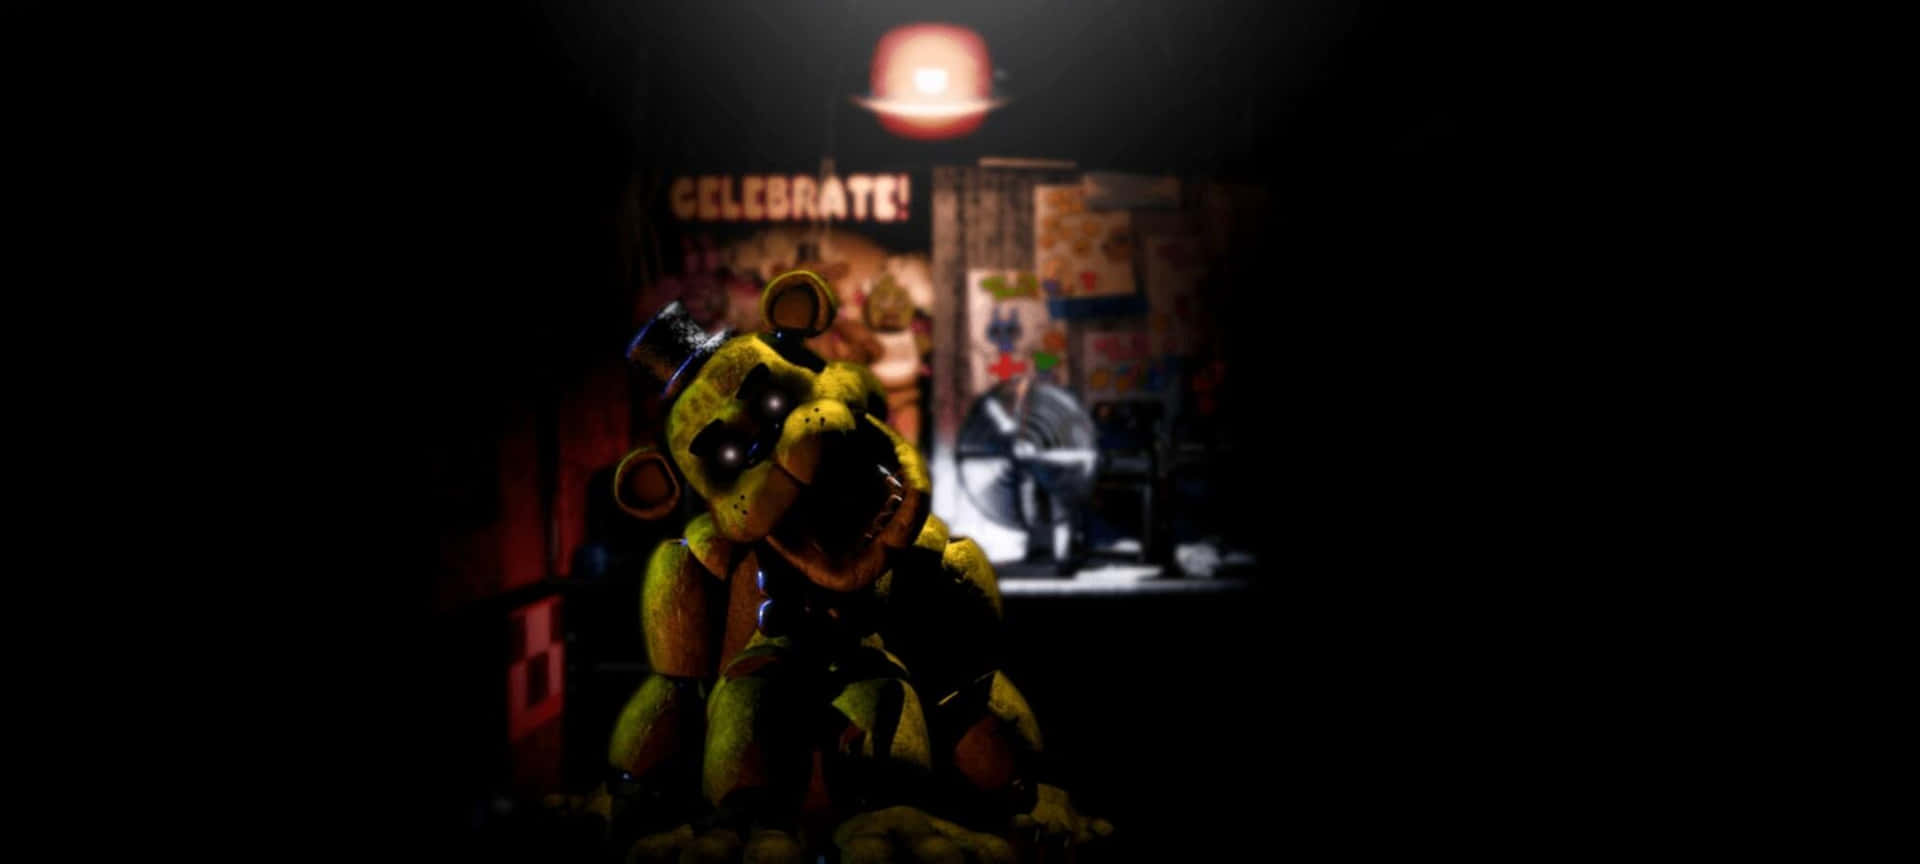 Mysterious Golden Freddy lurking in the shadows Wallpaper